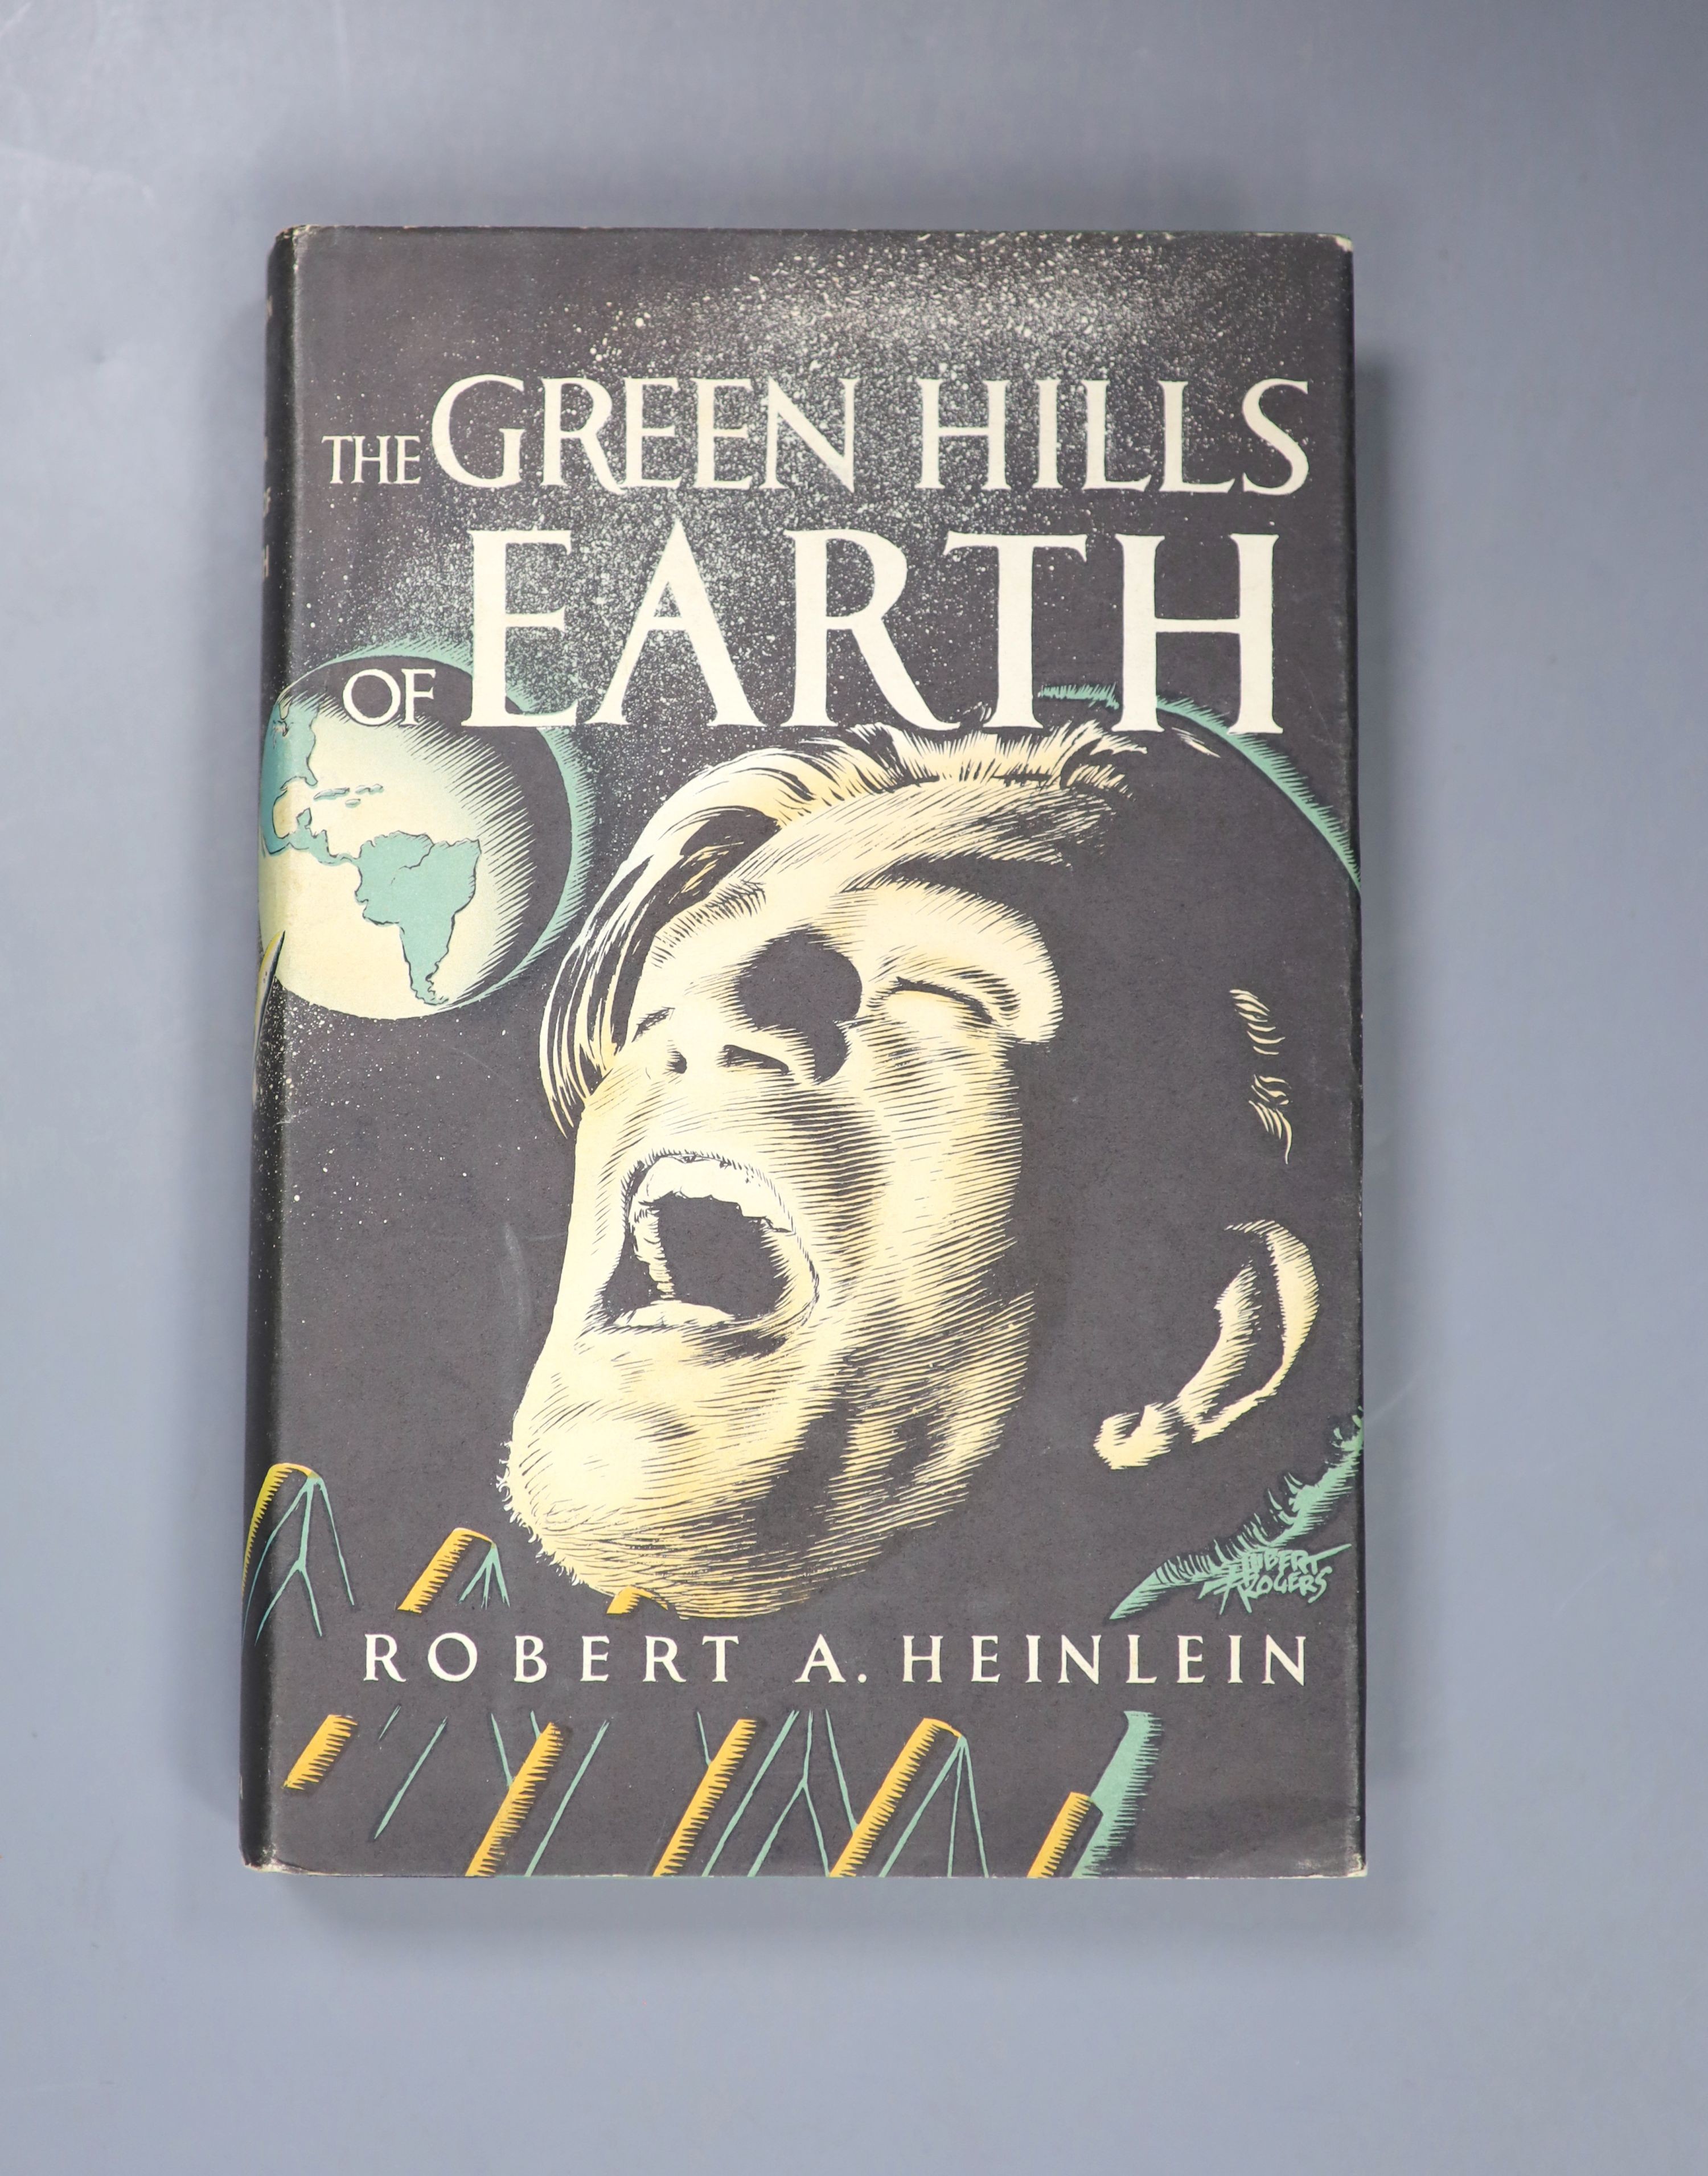 Heinlein, Robert A - Six works - Beyond This Horizon, 1st edition, with unclipped d/j, Fantasy Press, 1949; The Man Who Sold the Moon, 1st edition, with unclipped d/j, Shasta, Chicago, 1950; The Green Hills of Earth, 1st